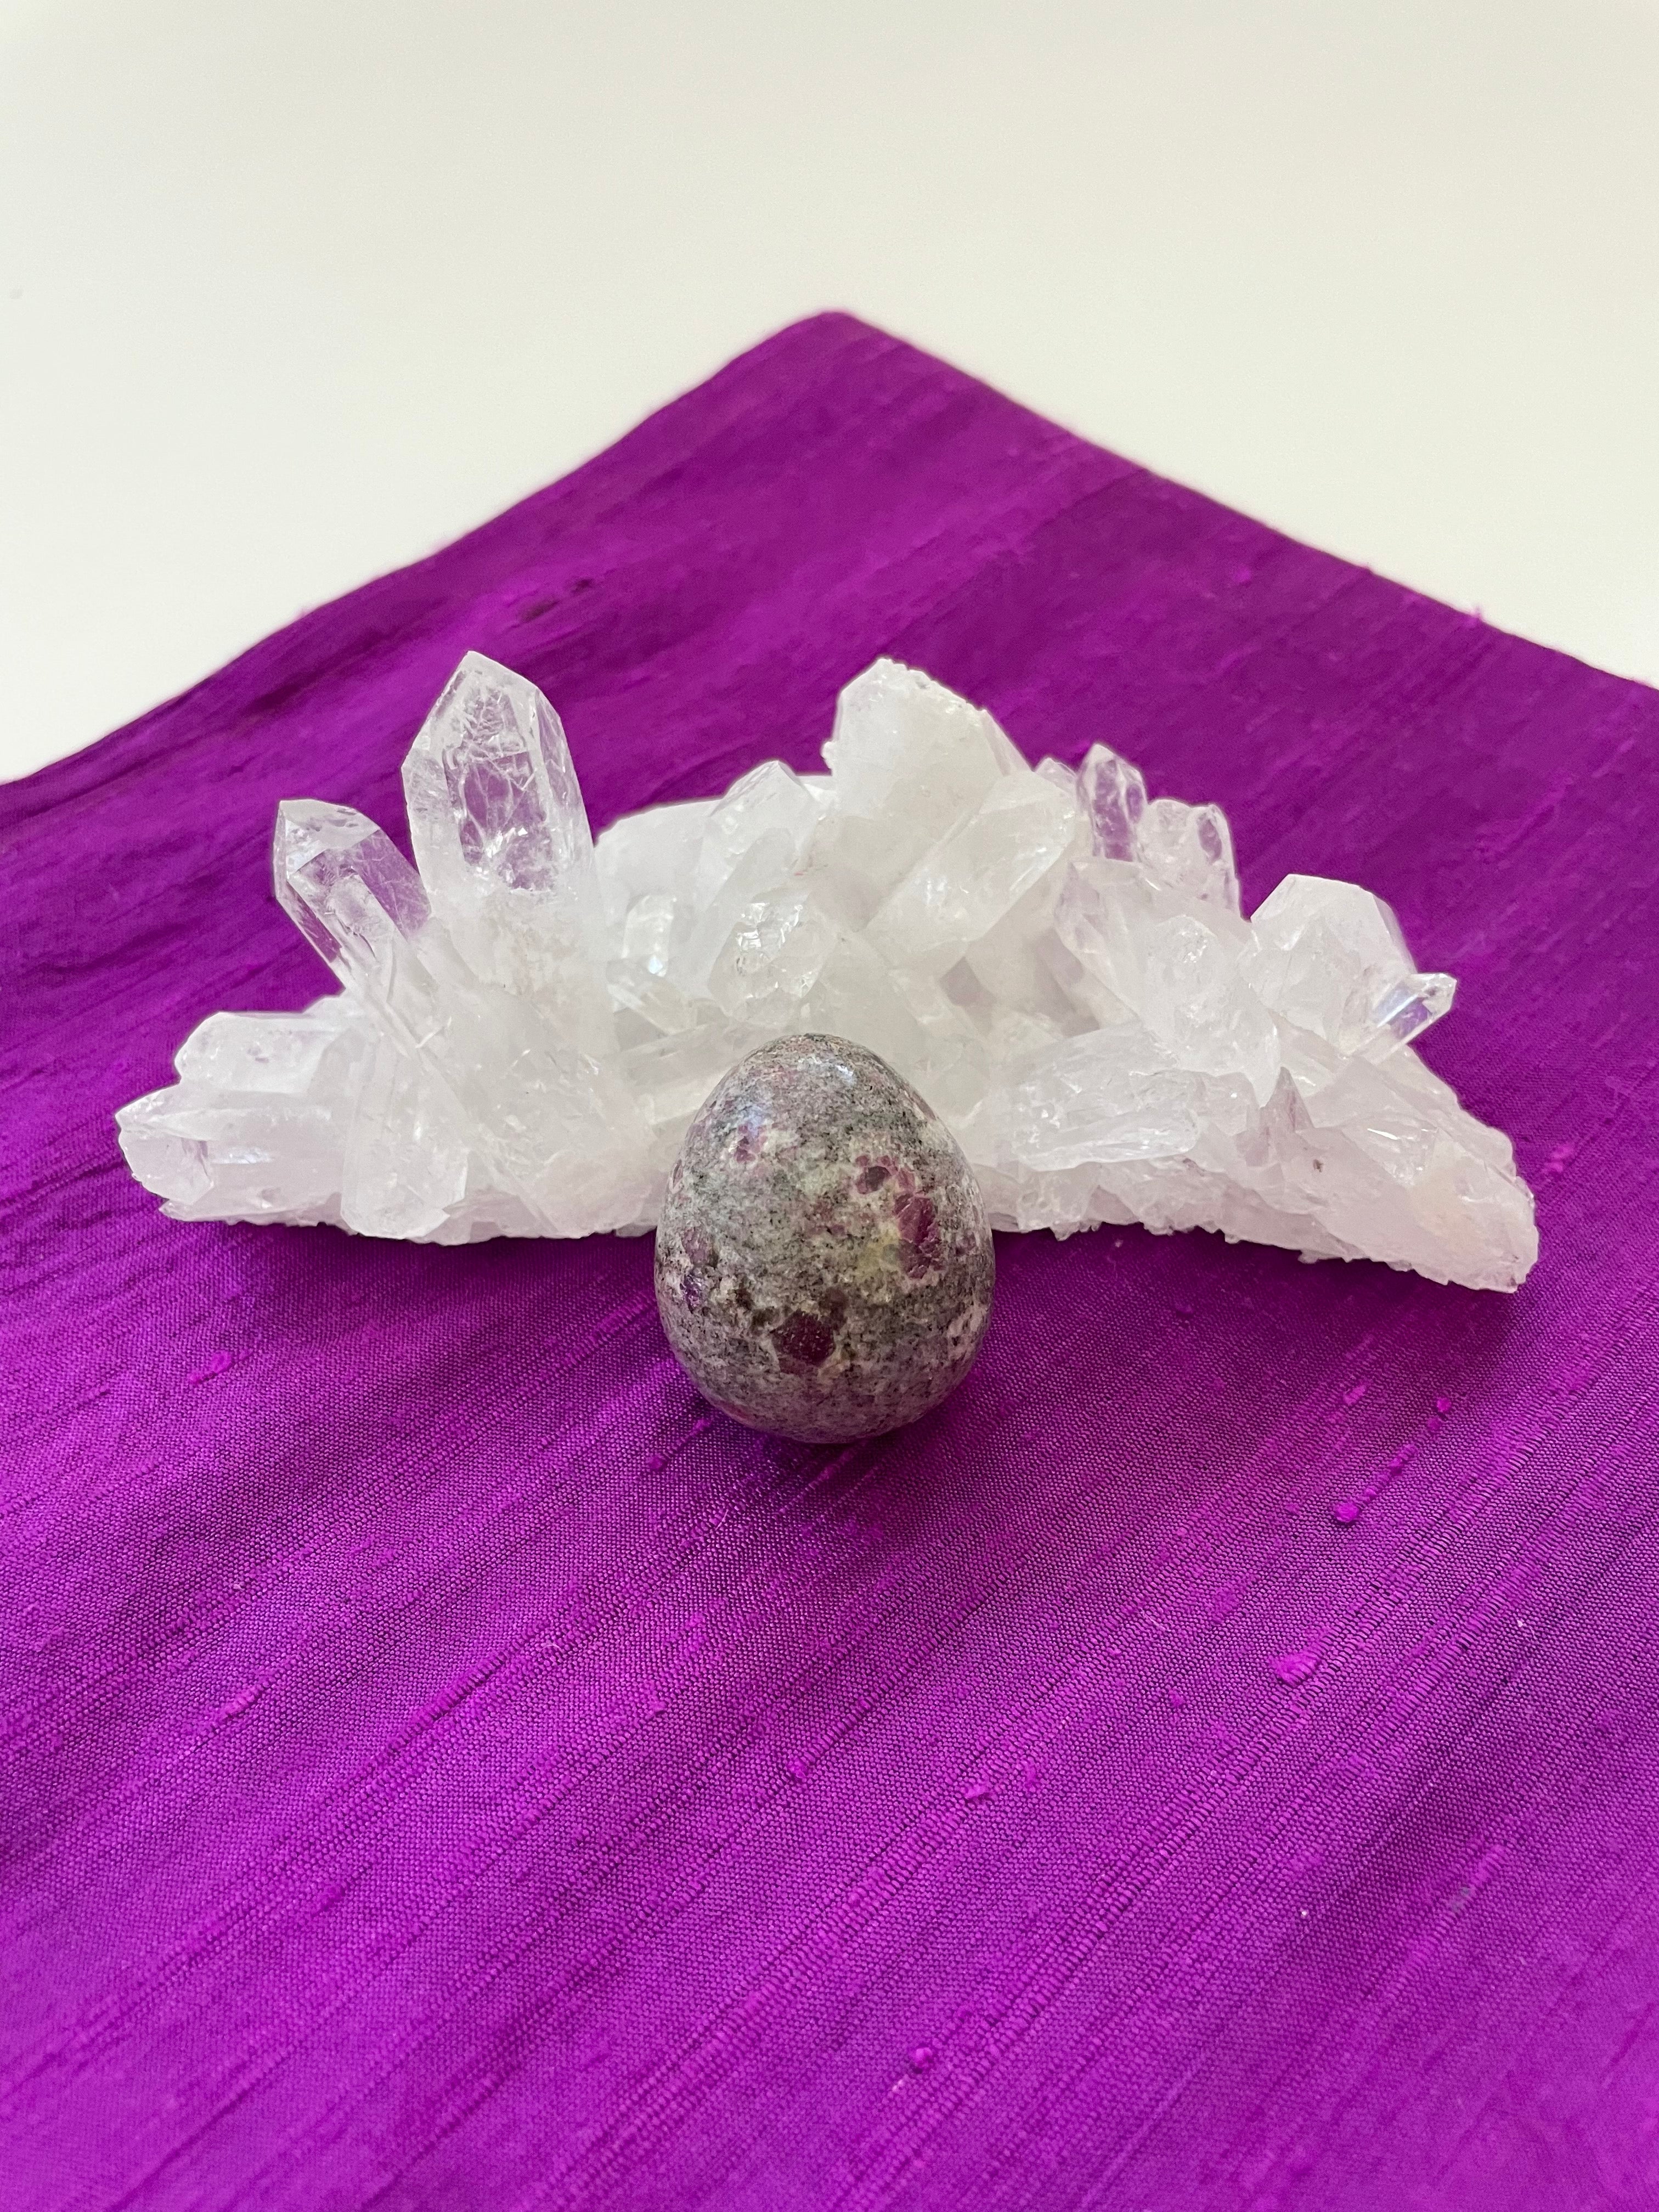 This gorgeous ruby in matrix egg is perfect for your altar, for healing, to hold during meditation, or as décor in your home or office. It consists of rubies set in their natural stone matrix or base. Ruby balances the heart & increases energy levels. It is a stone of love and passion and sexuality. It protects against psychic attack. It is a stone of prosperity. It enhances courage and leadership and much more. This sphere weighs 5.1 oz (144.58 grams) and is approximately 5¾" in circumference. Cost $9.